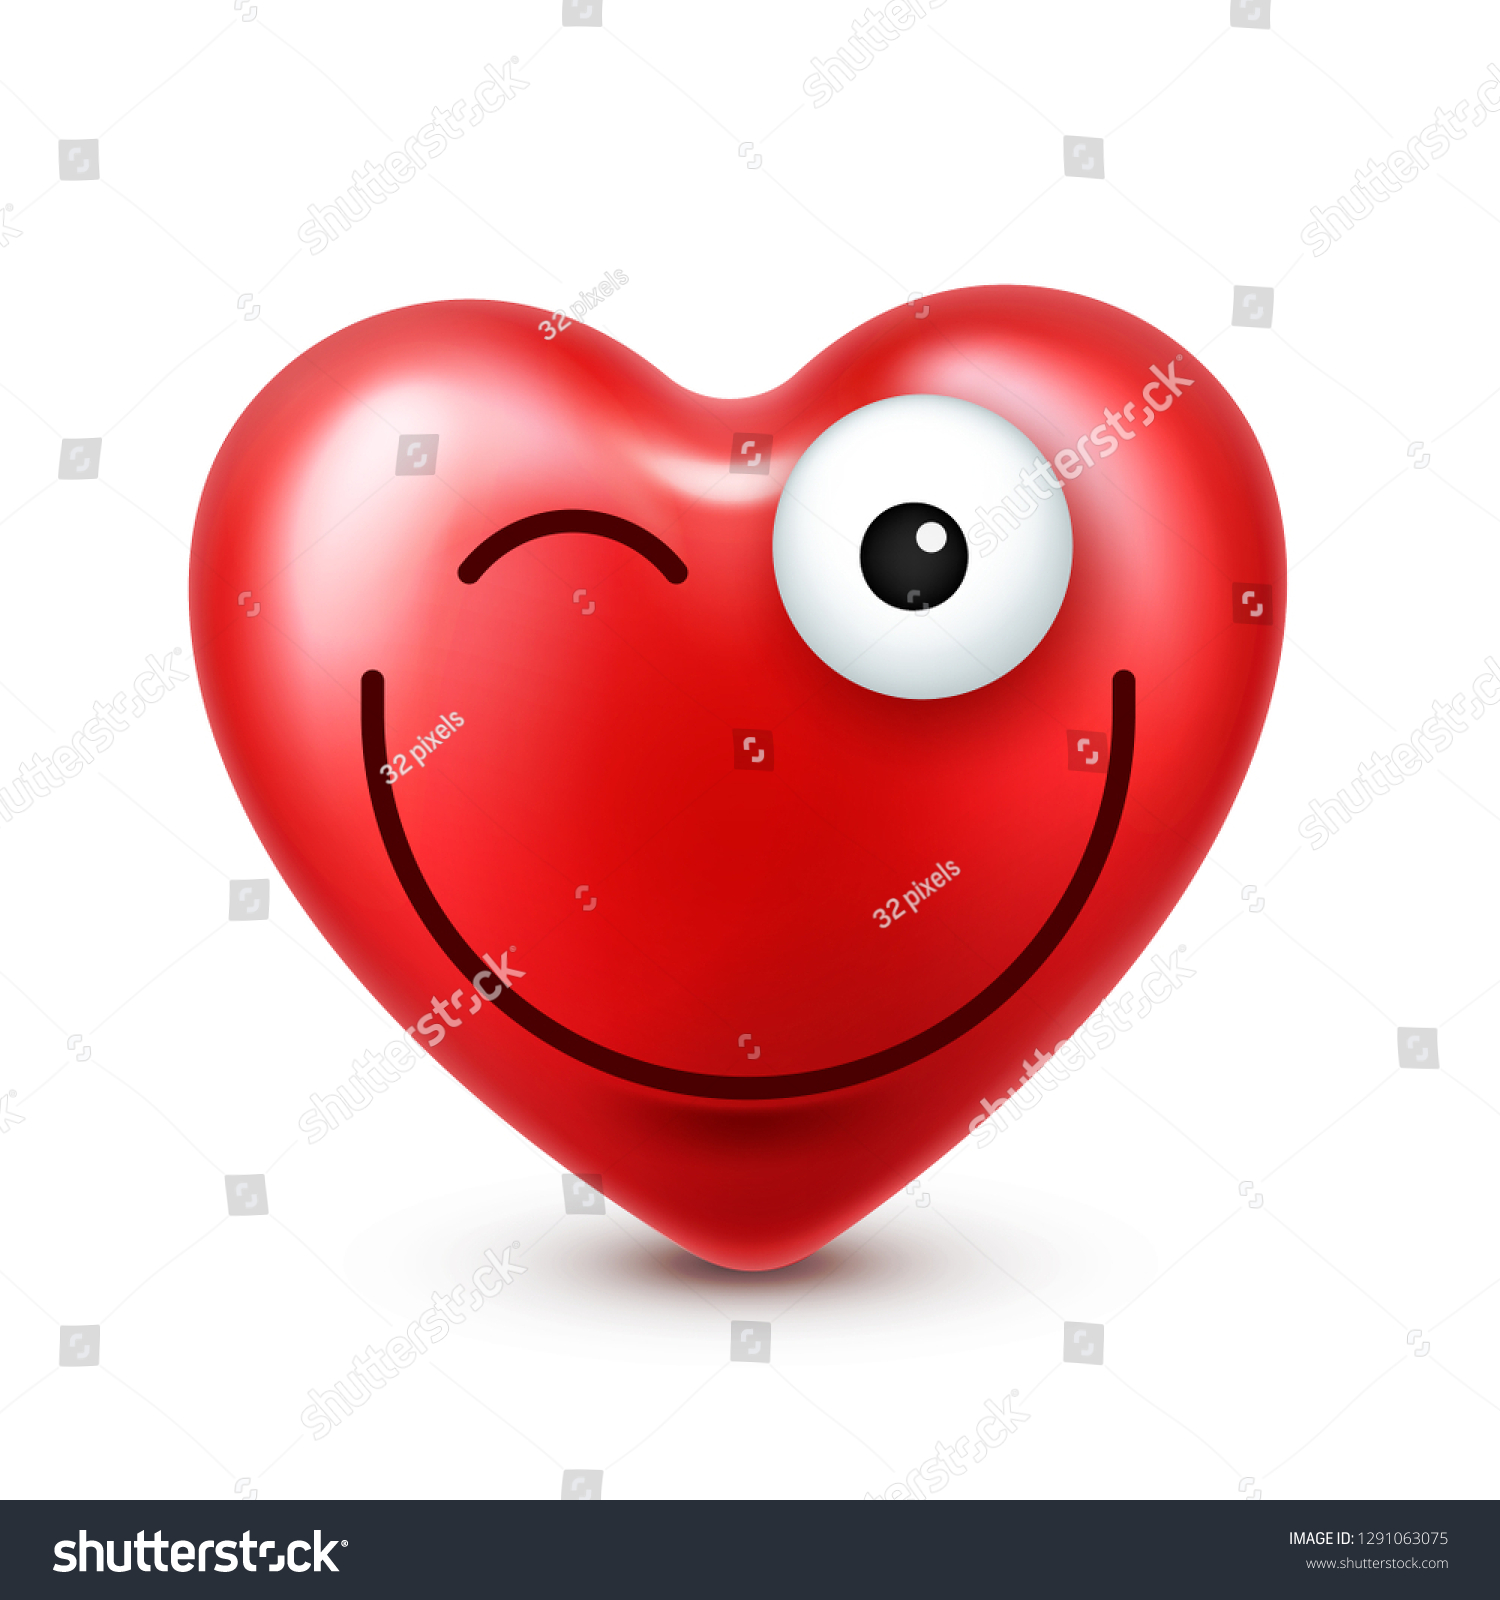 Heart smiley emoji vector for Valentines Day. Funny red face with expressions and emotions. Love symbol. #1291063075